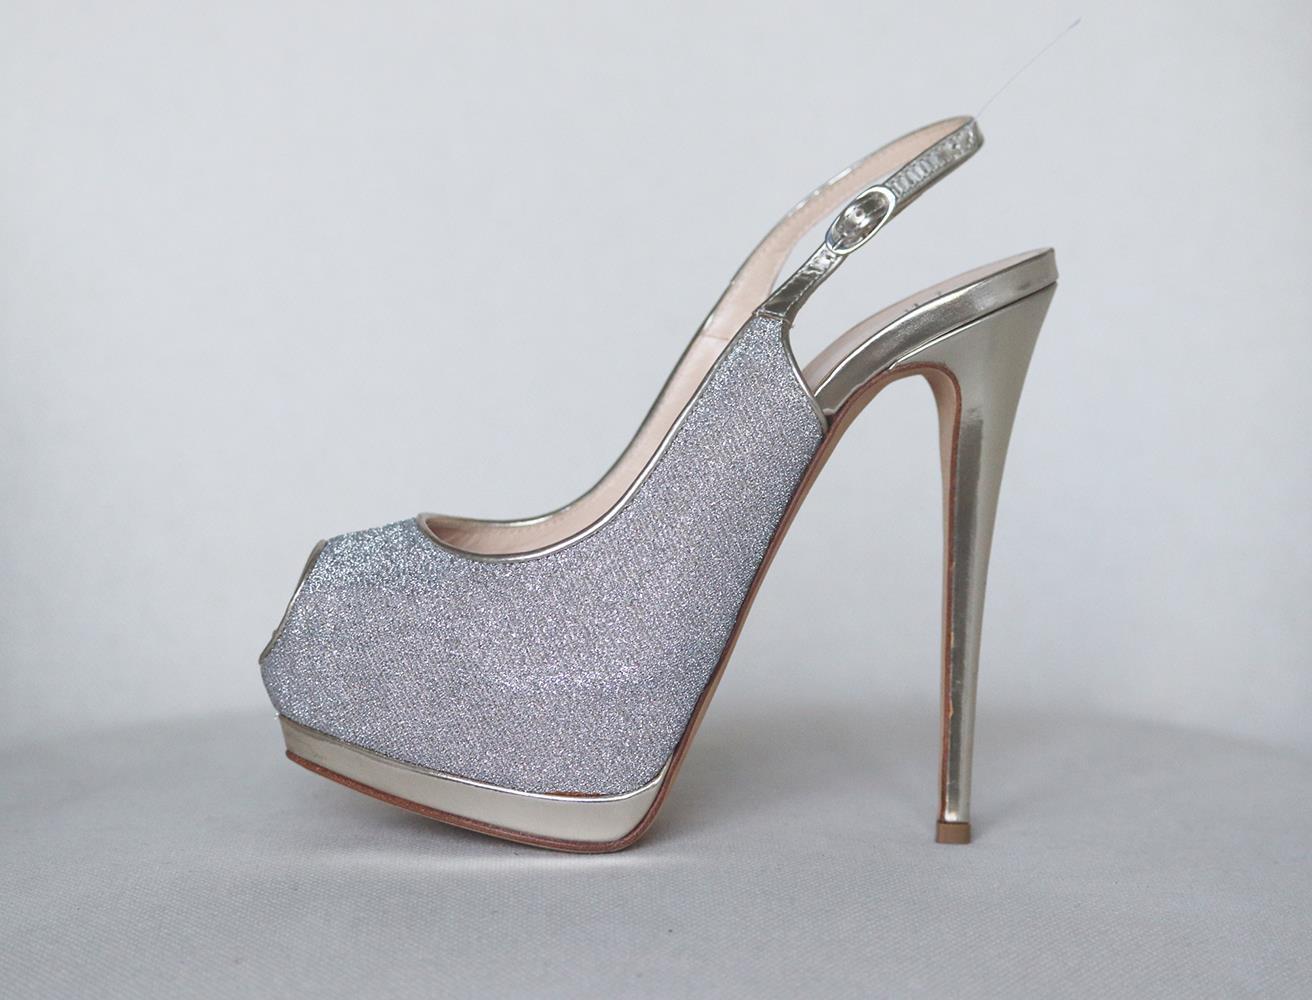 Giuseppe Zanotti's pumps have been made in Italy from silver glitter and gold mirrored leather, they're set on a towering 120mm stiletto heel that's balanced by a concealed platform and have a peep-toe silhouette and slingback fastening. Heel